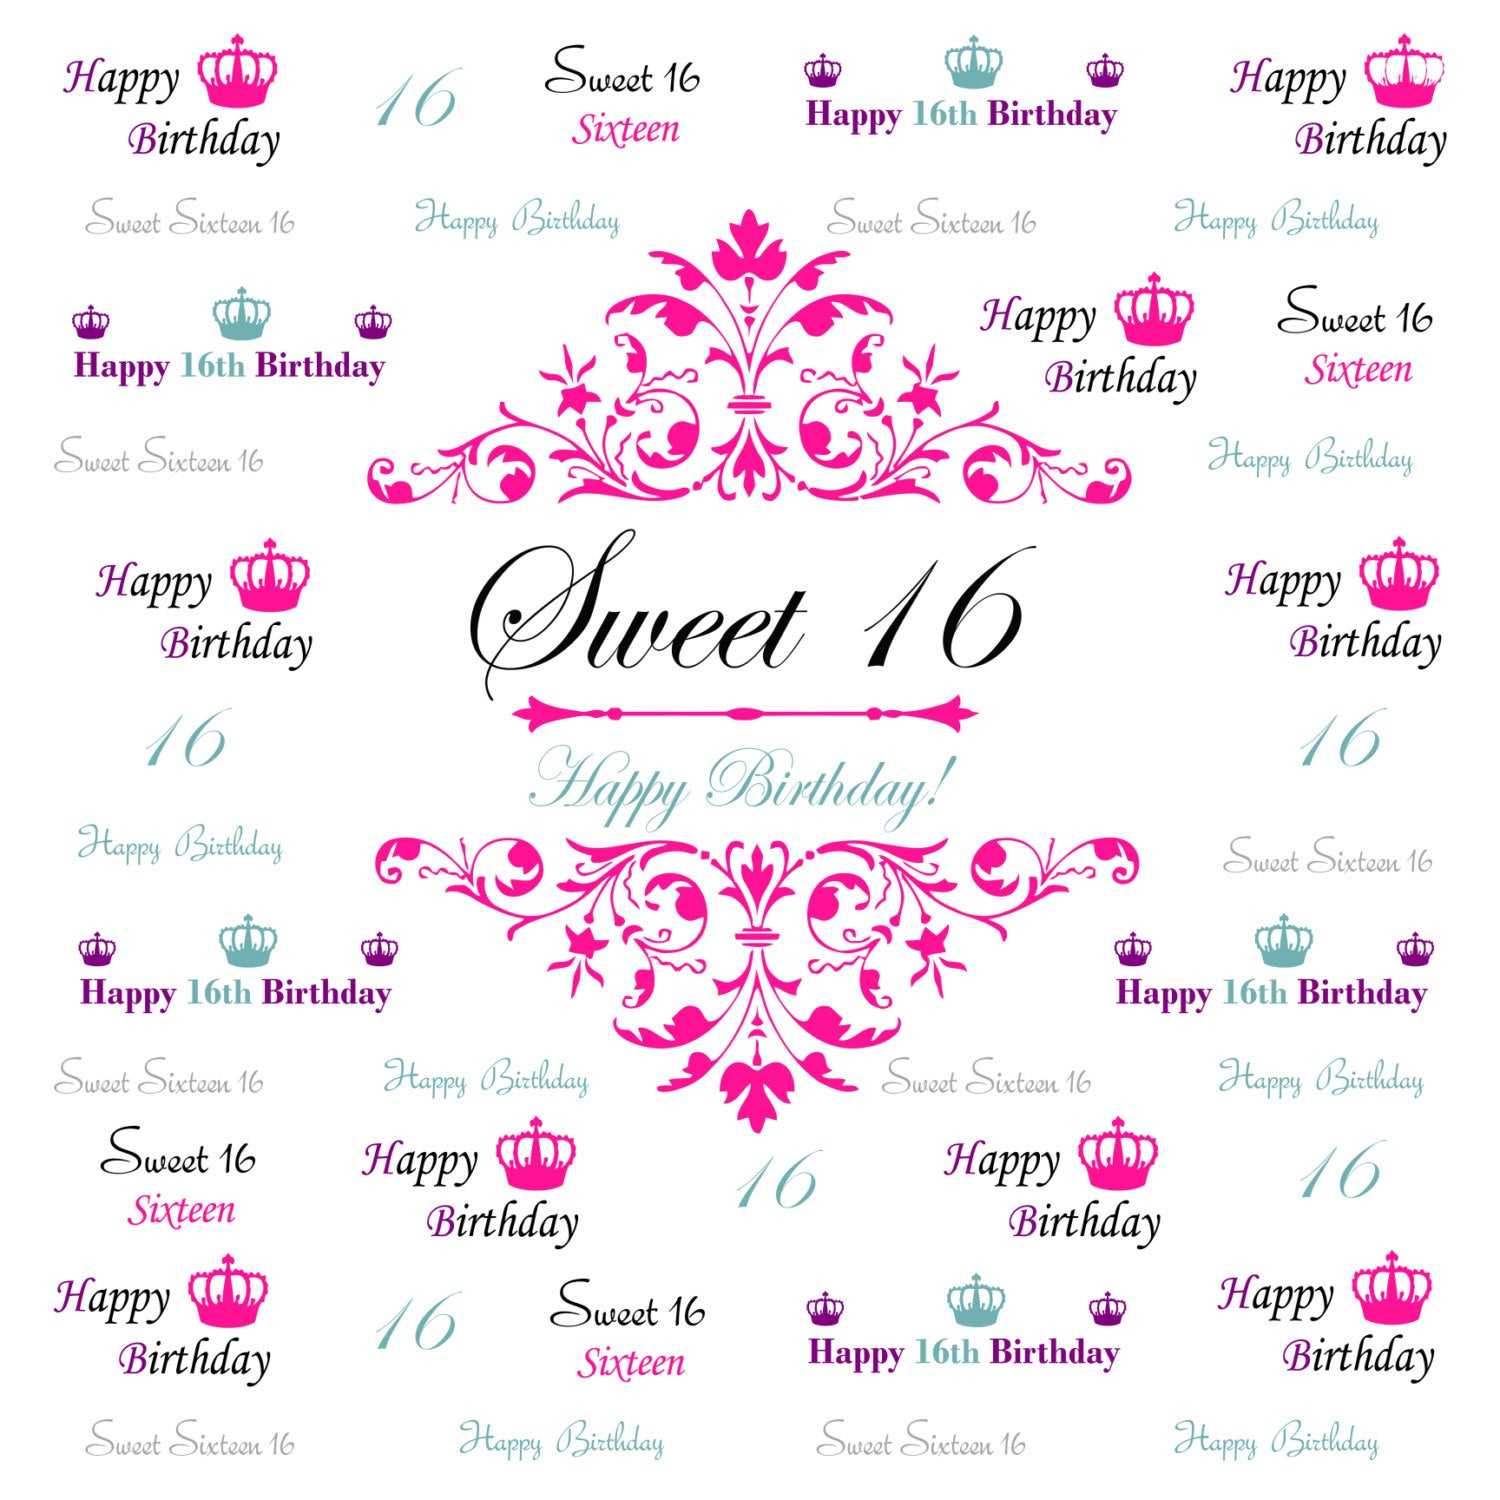 021 Template Ideas Step And Repeat Banner Il Fullxfull In Sweet 16 Banner Template